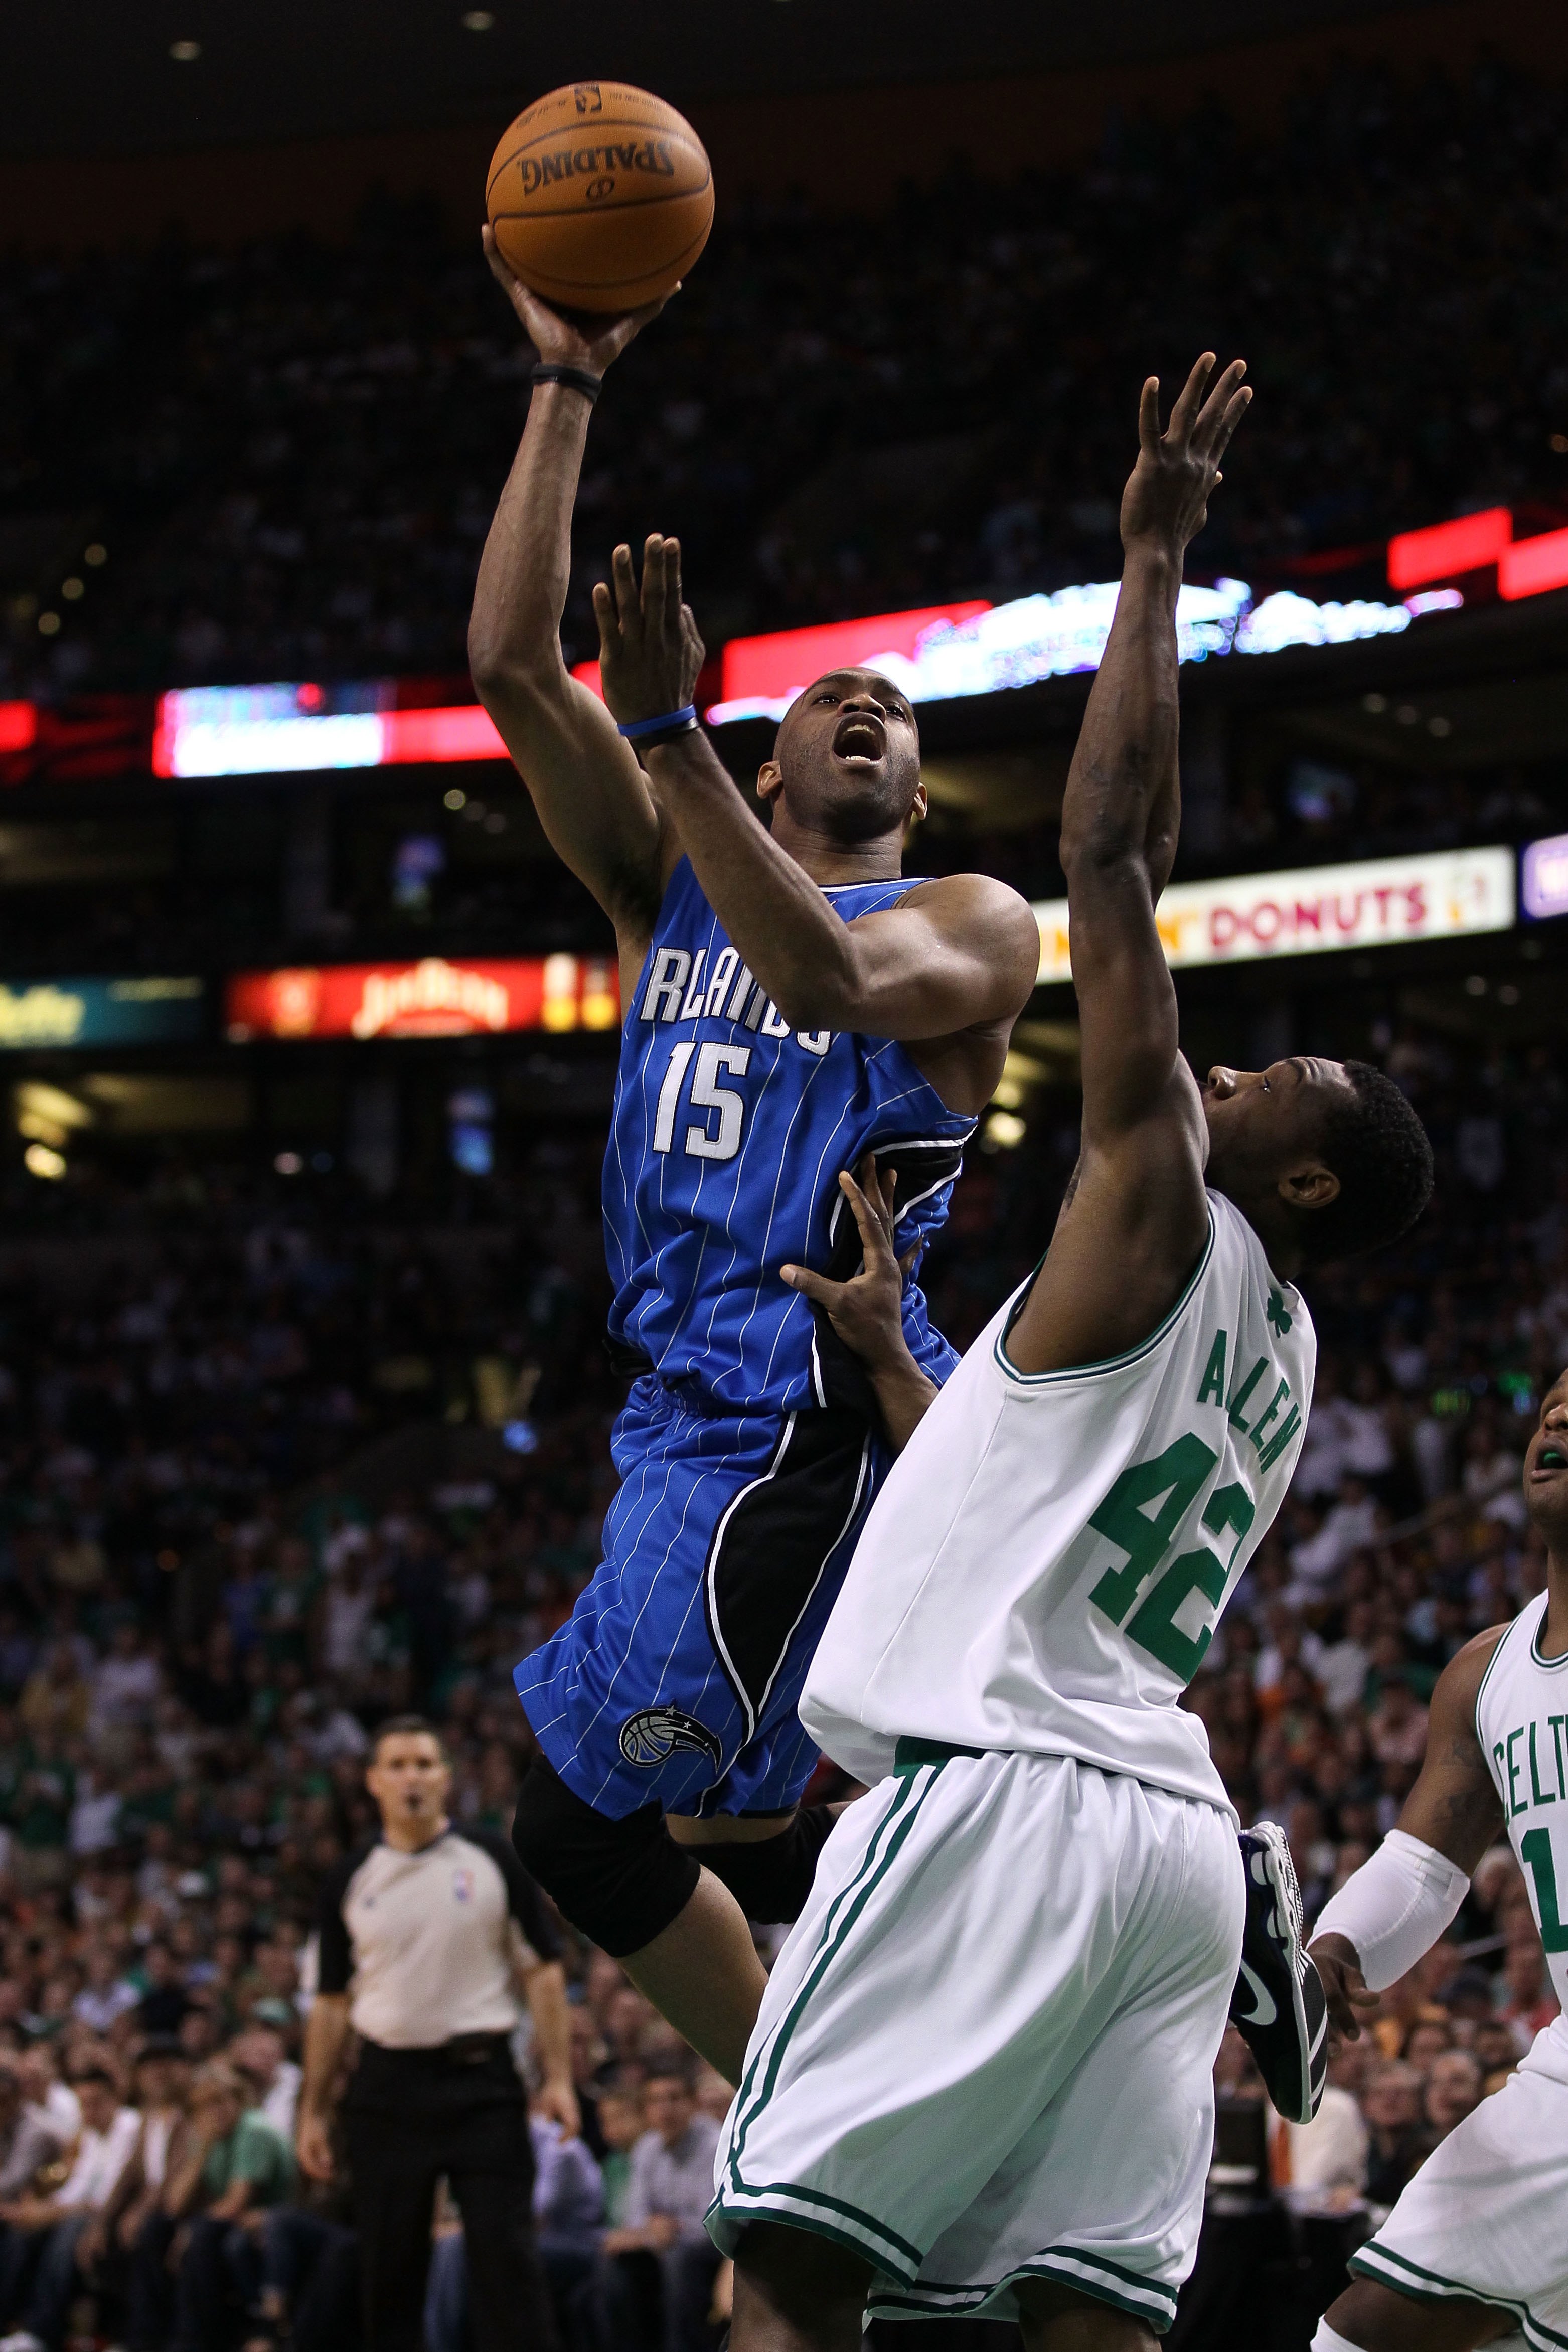 BOSTON - MAY 28:  Vince Carter #15 of the Orlando Magic attempts a shot against Tony Allen #42 of the Boston Celtics in Game Six of the Eastern Conference Finals during the 2010 NBA Playoffs at TD Garden on May 28, 2010 in Boston, Massachusetts.  NOTE TO